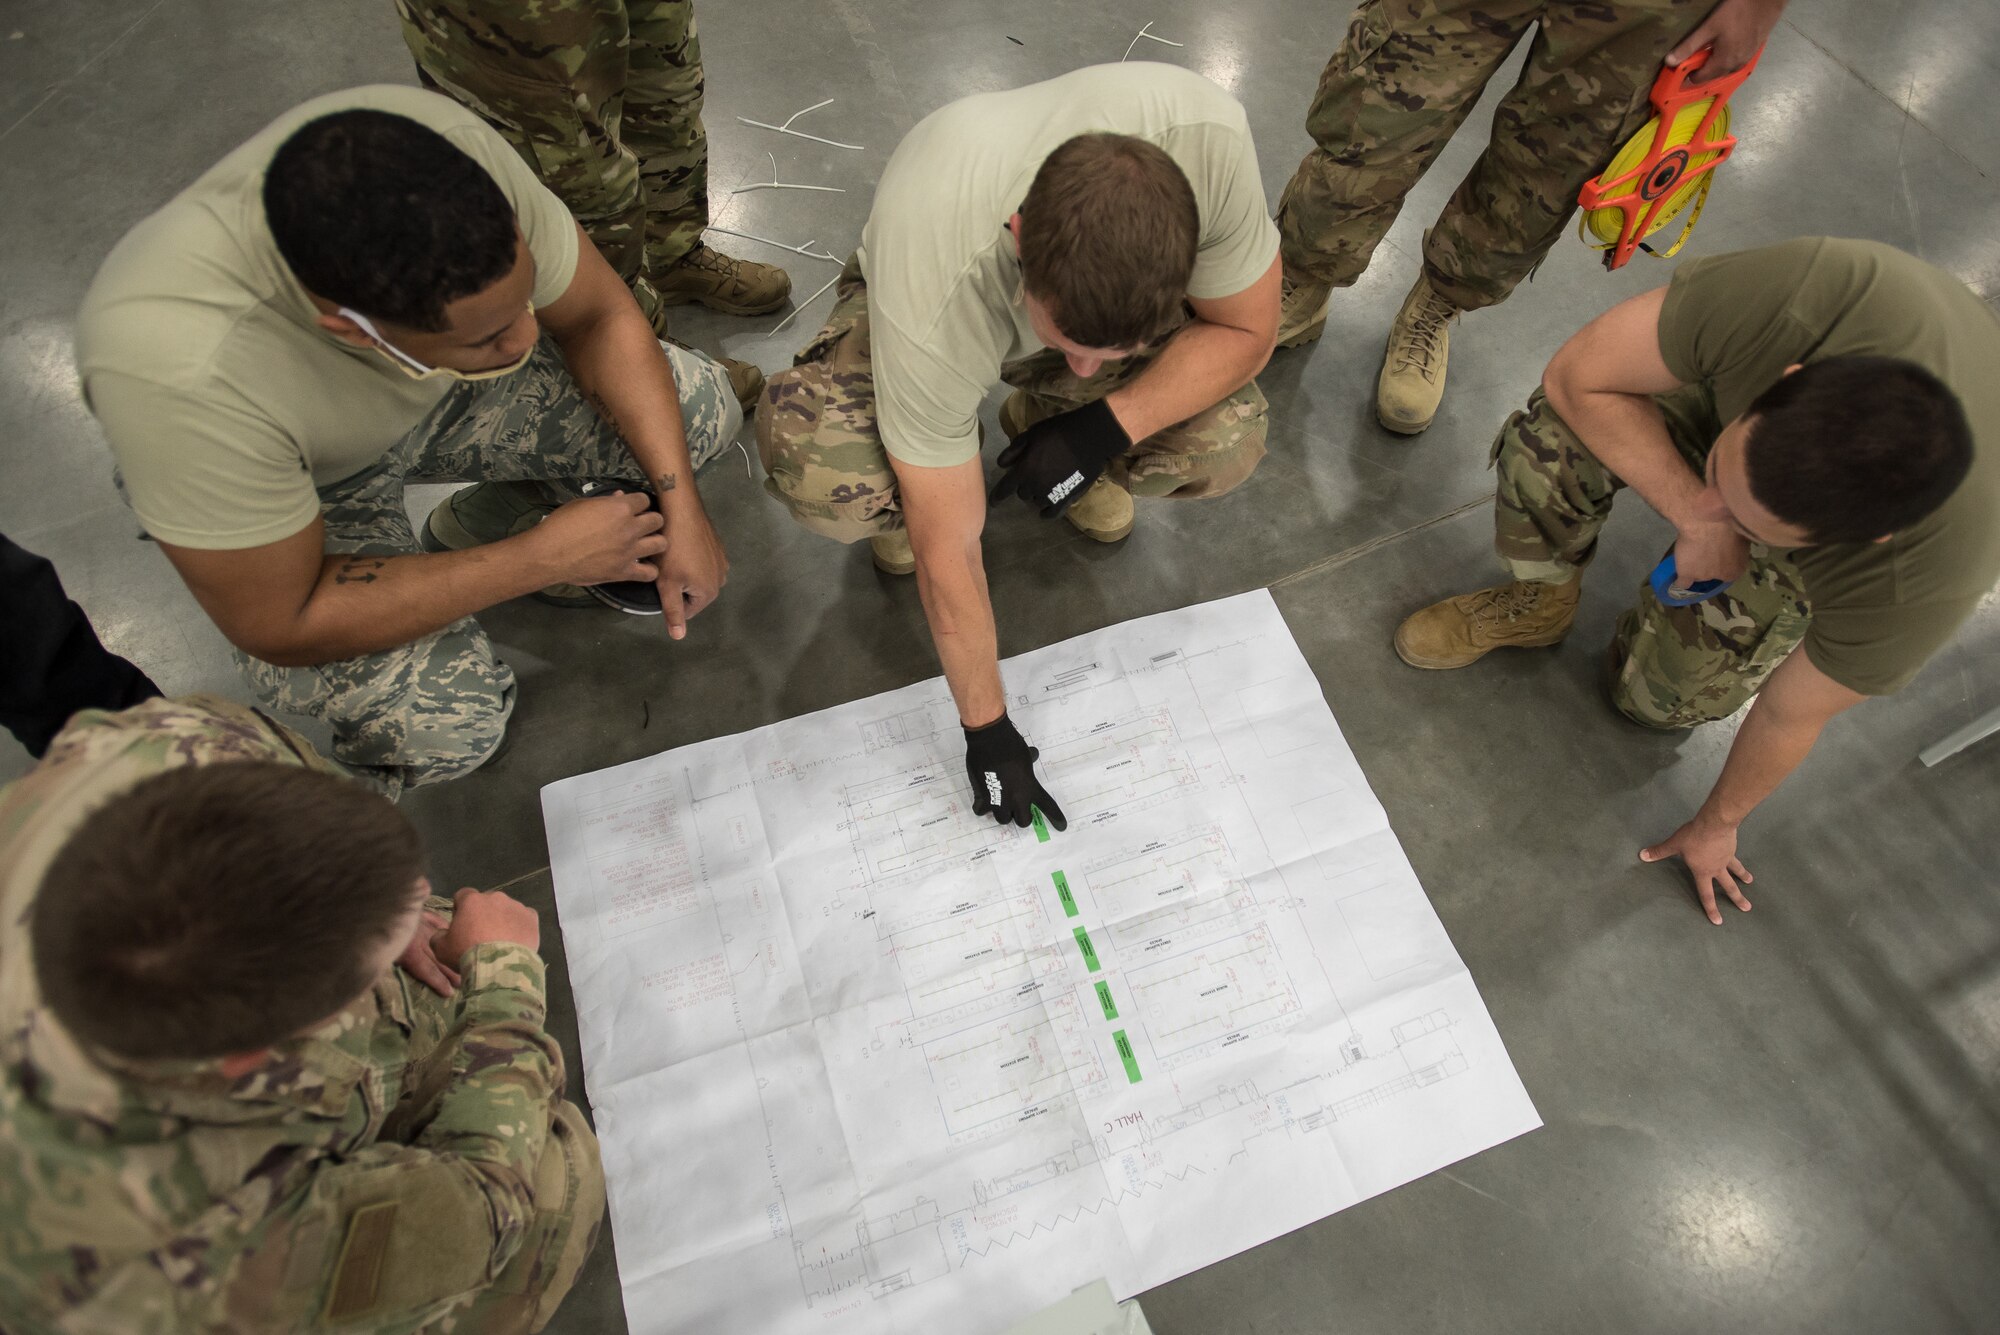 Members of the Kentucky Air National Guard’s 123rd Civil Engineer Squadron consult plans before setting up hospital beds and clinical space at the Kentucky Fair and Exposition Center in Louisville, Ky., April 11, 2020. The site, which is expected to be operational April 15, will serve as an Alternate Care Facility for patients suffering from COVID-19 if area hospitals exceed available capacity. The location initially can treat up to 288 patients and is scalable to 2,000 beds. (U.S. Air National Guard photo by Dale Greer)